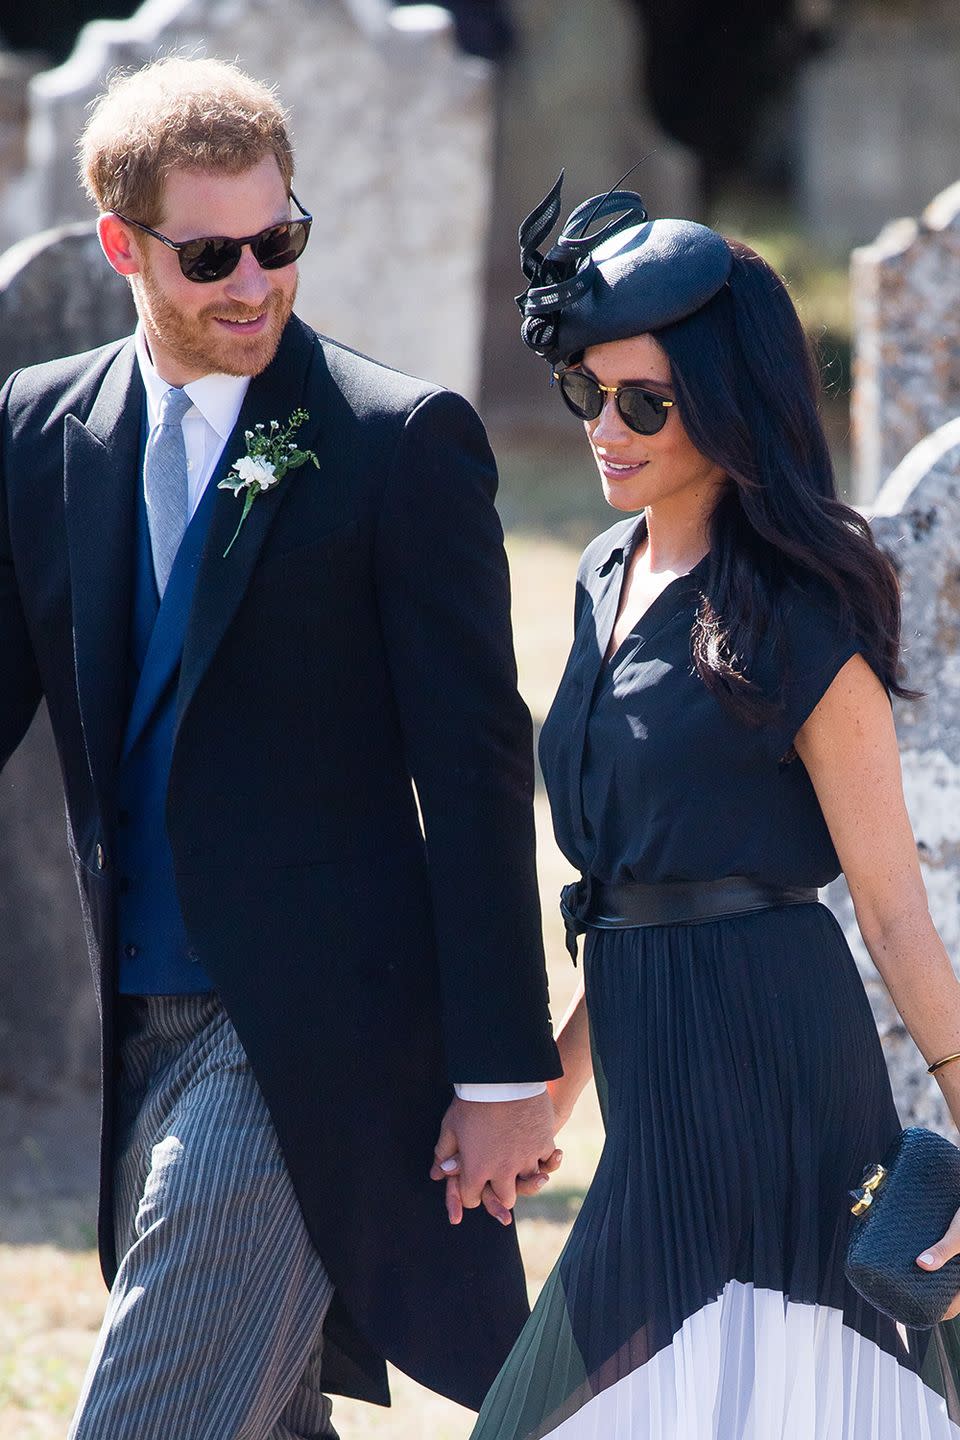 <p>Back we go to the very beginning of Meghan and Harry's first pregnancy... On Meghan's 37th birthday in early August, she and Harry attended the wedding of Charlie van Straubenzee and Daisy Jenks. Now we know when Archie was born - 6 May, 2019 - we can track back to the very early days of Meghan Markle's first pregnancy, which is around about this time. Being in the very first days of pregnancy, Meghan wasn't showing at all here.</p>